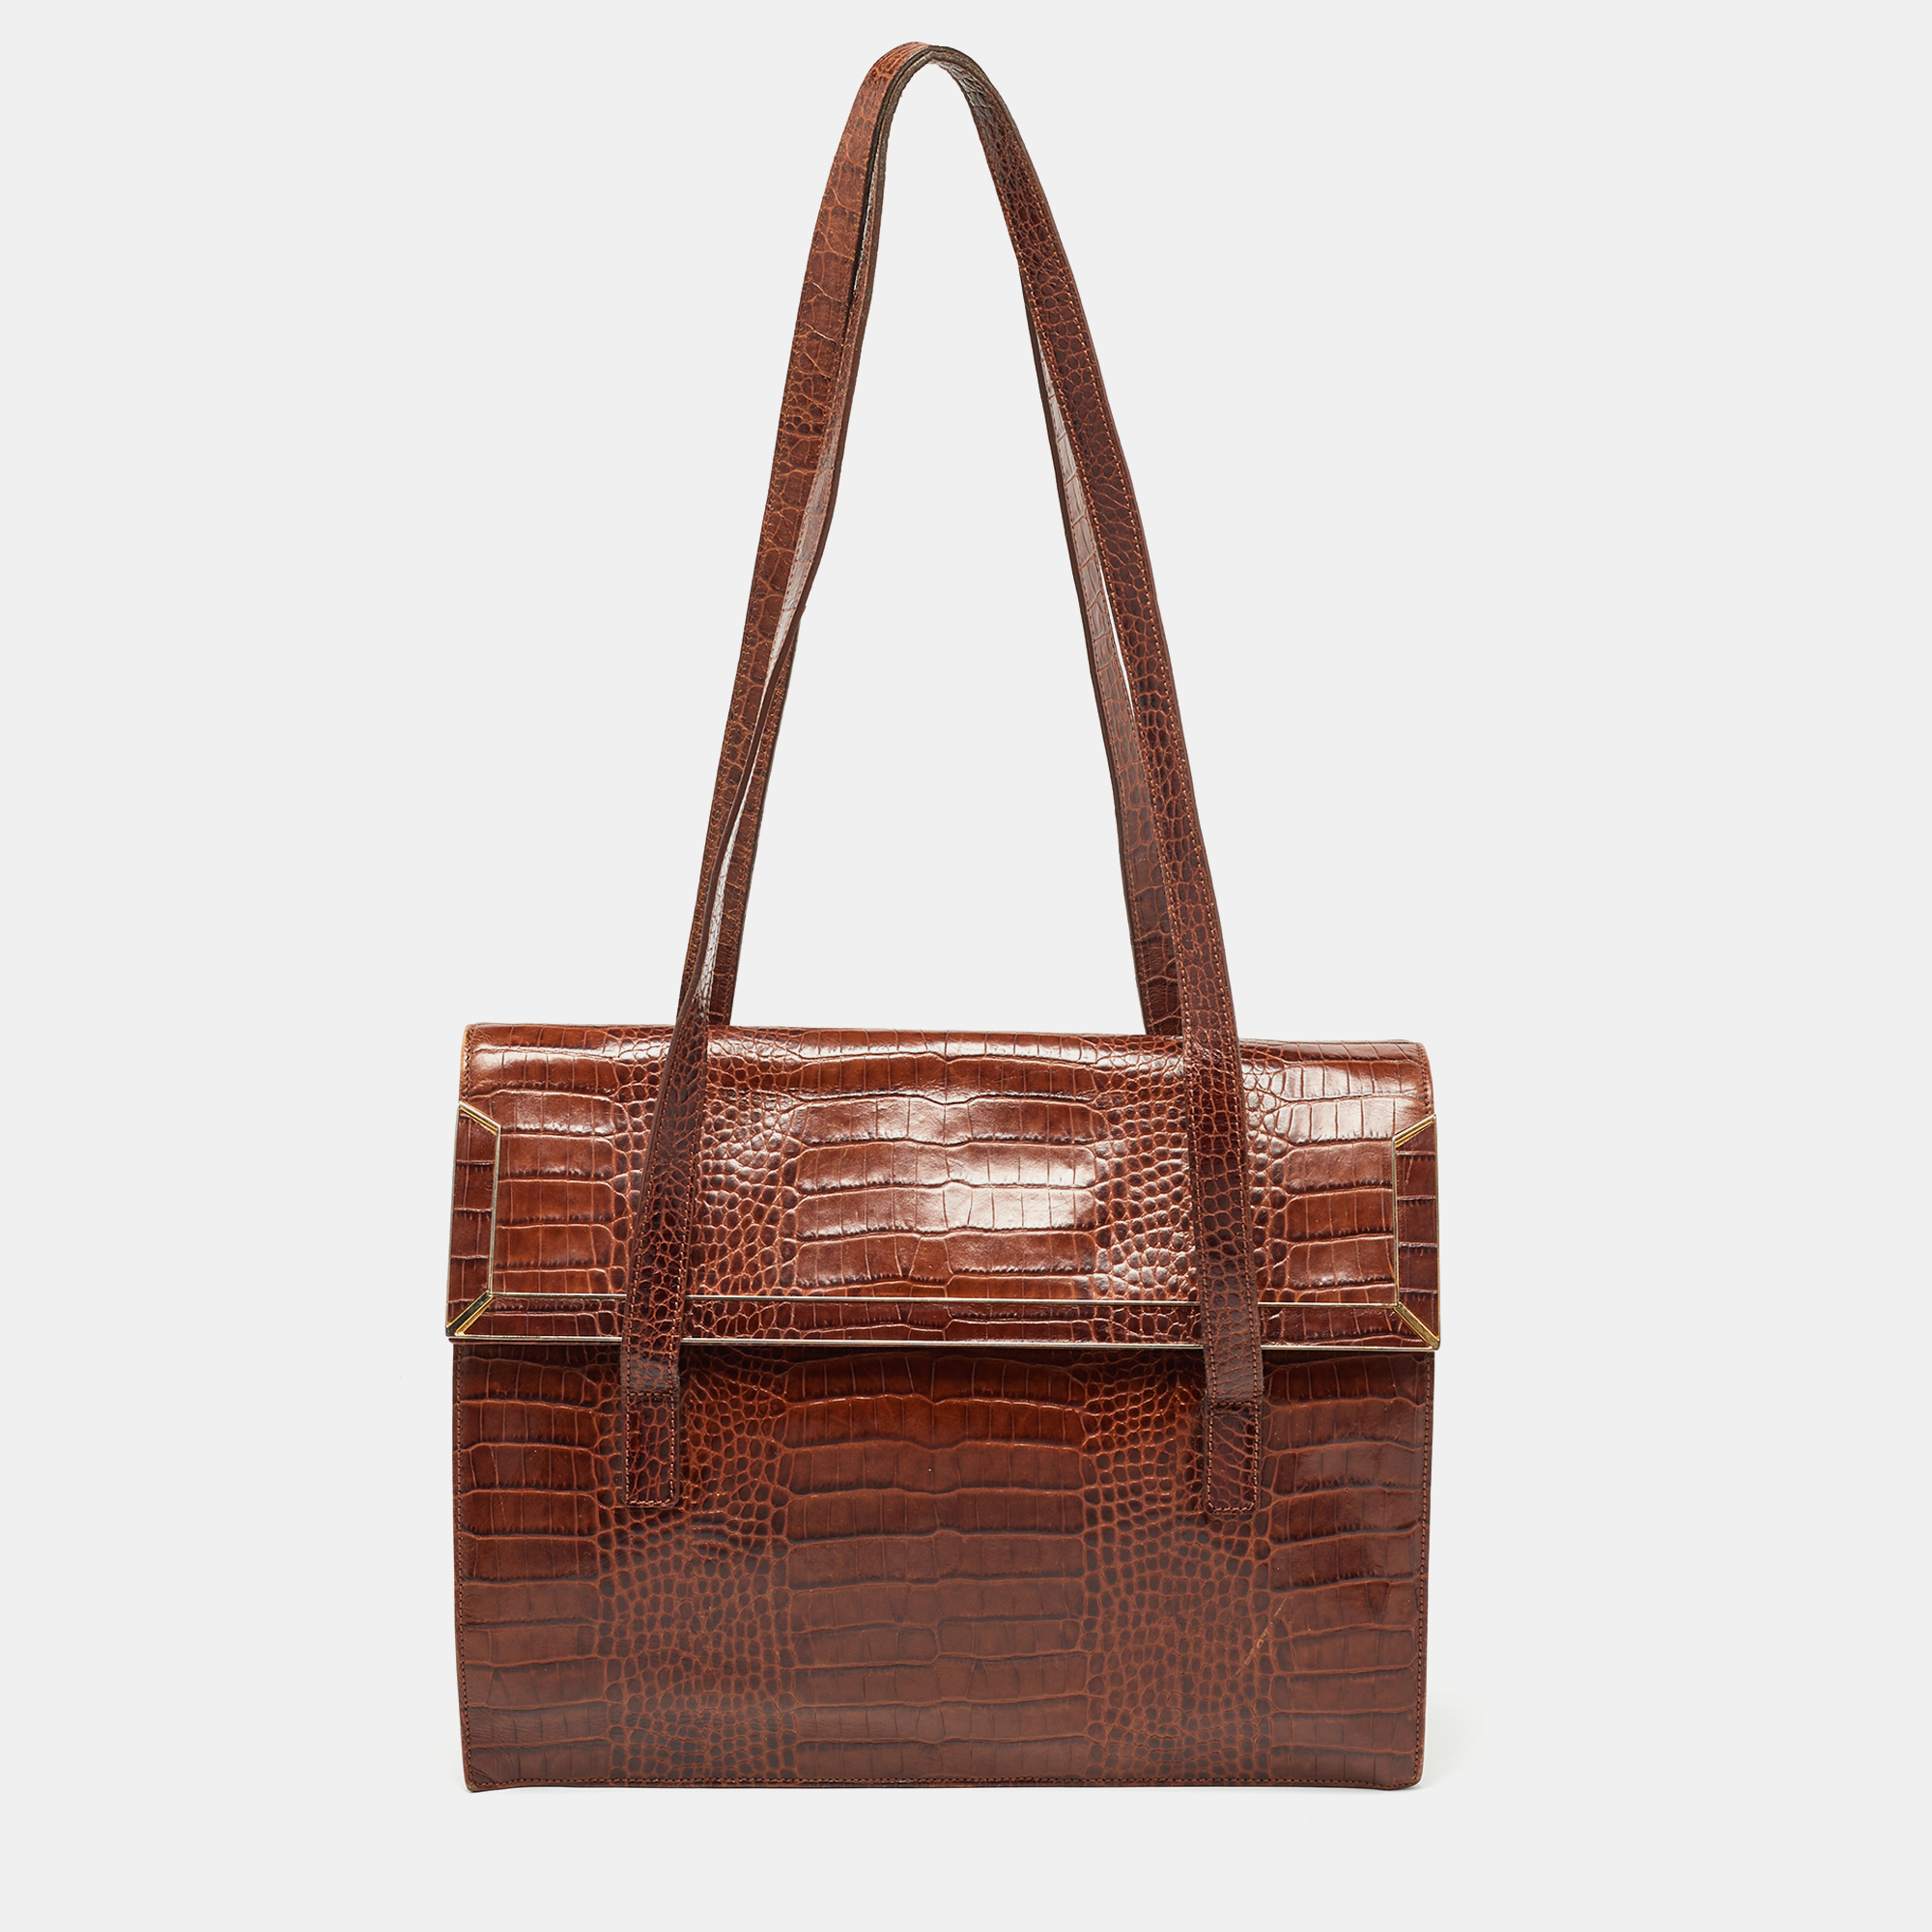 Escada brown croc embossed leather tote